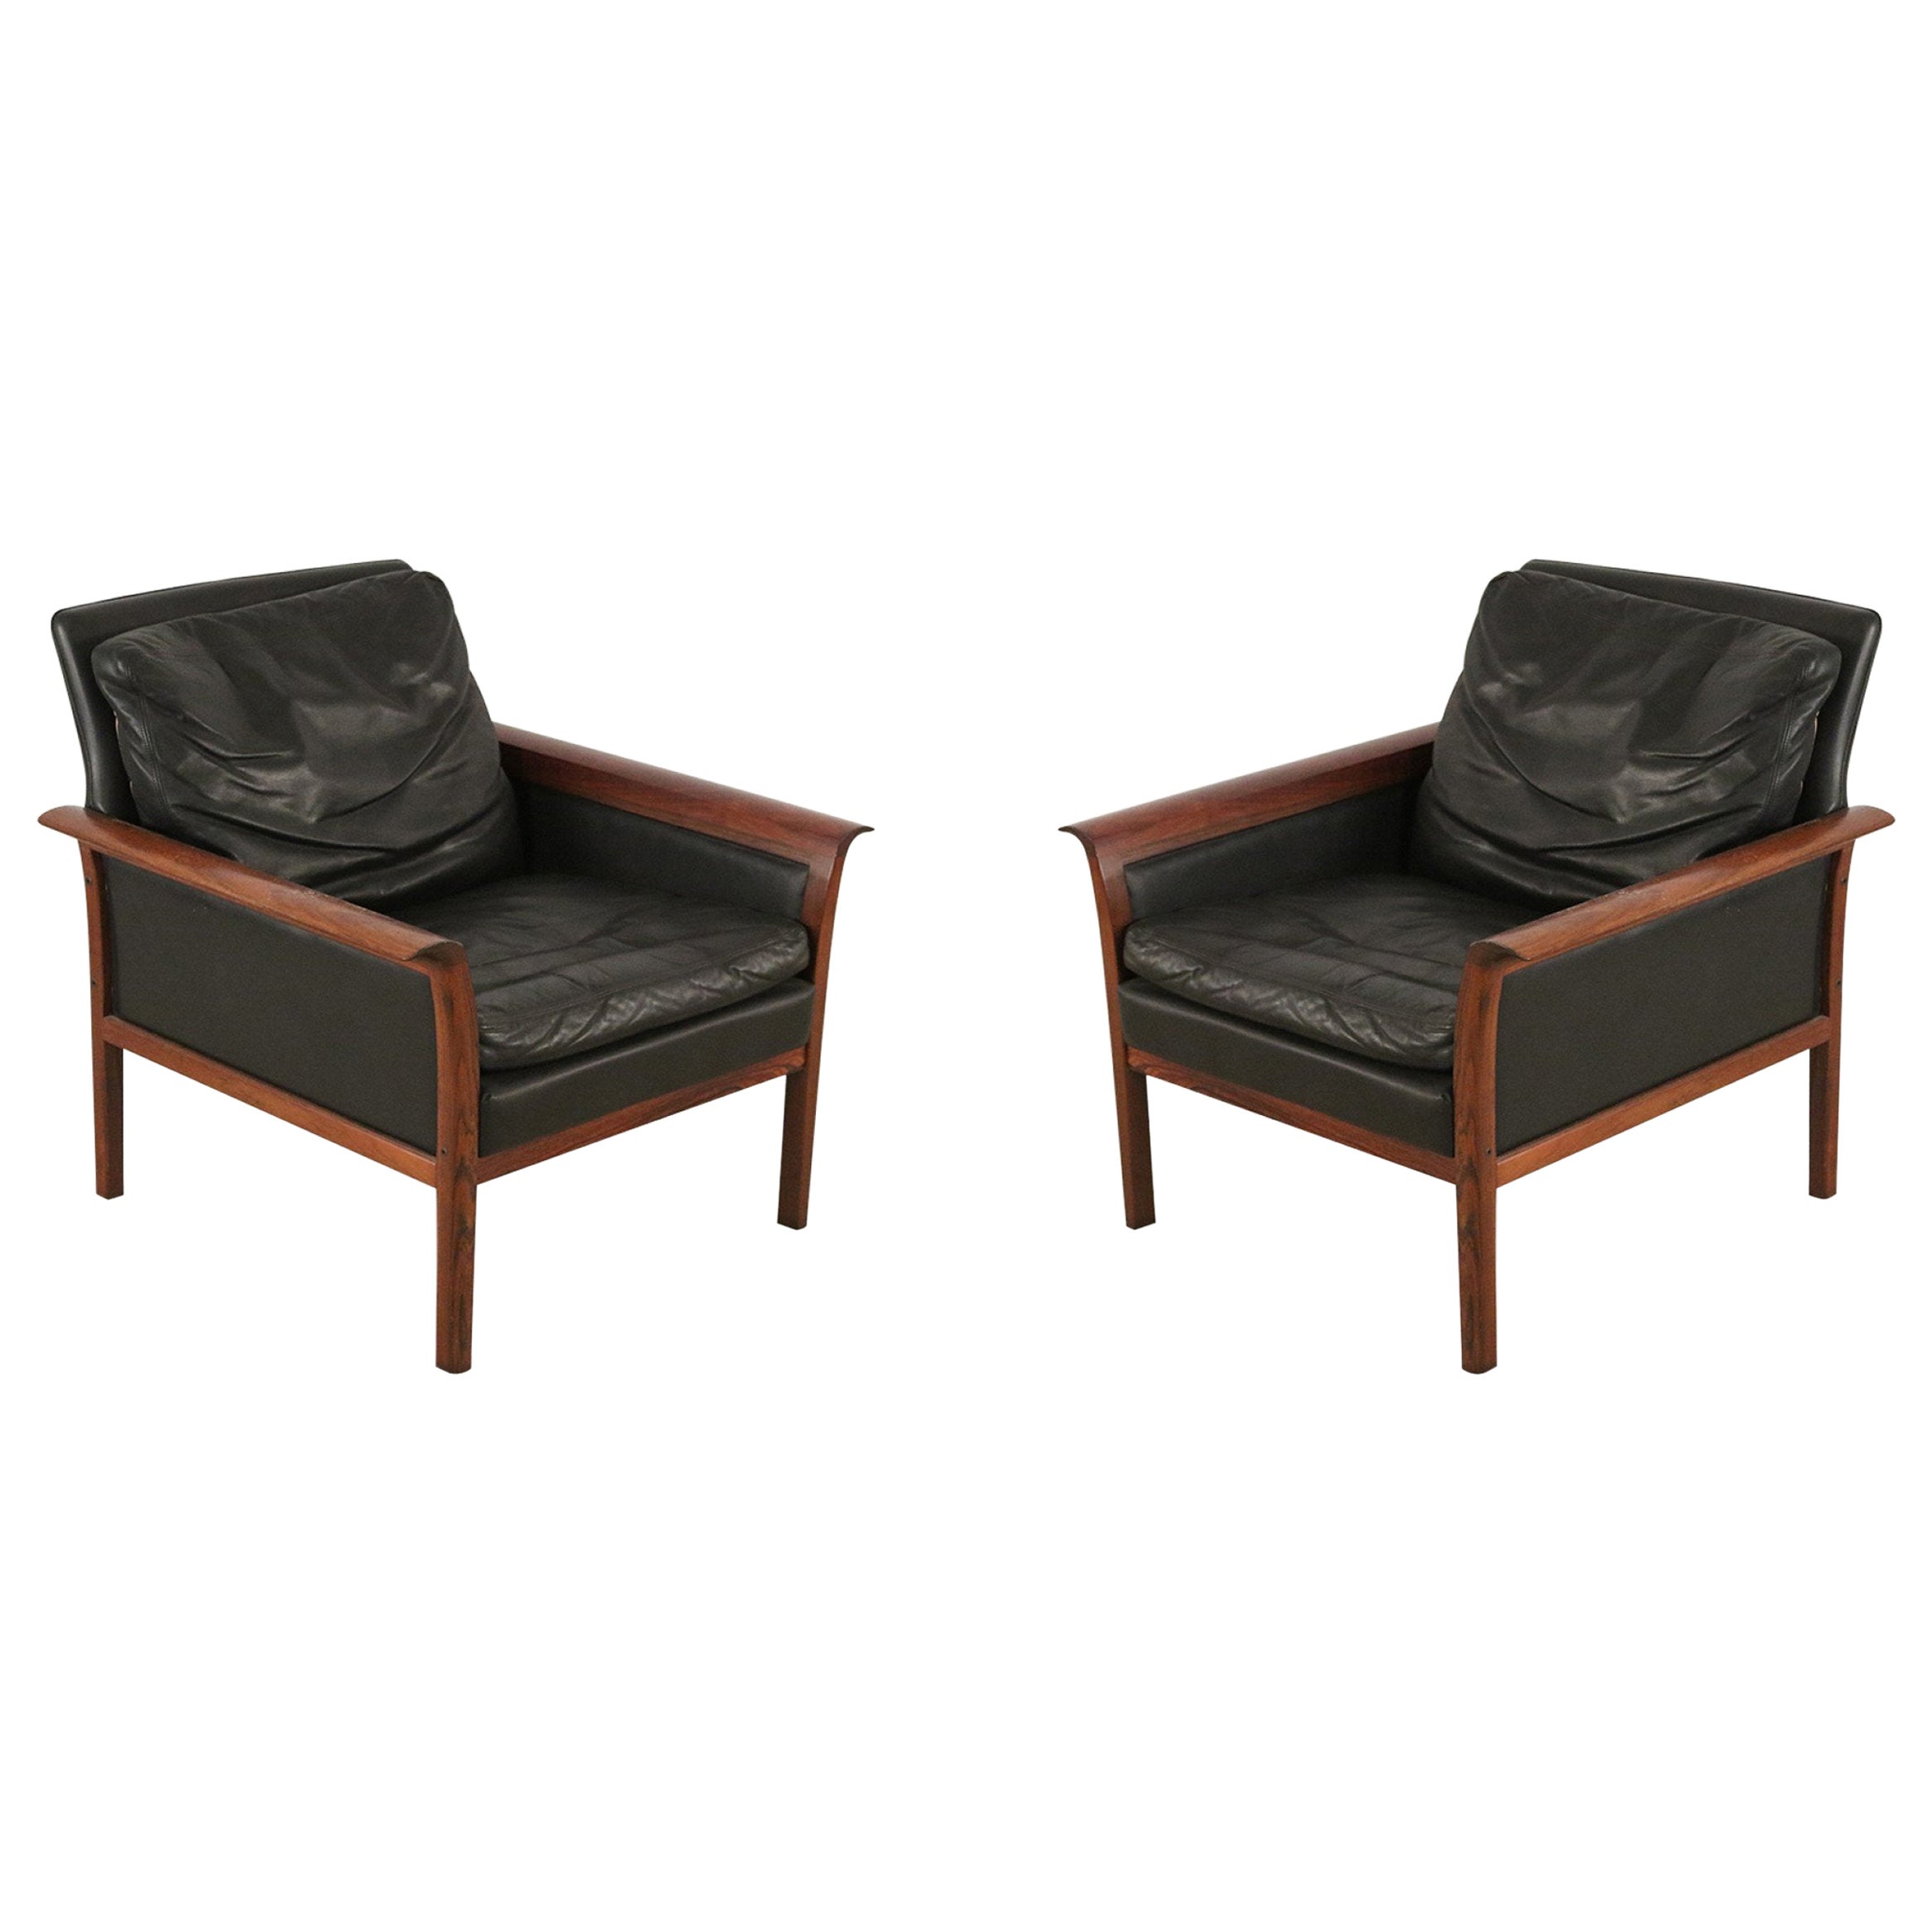 Pair of Knut Saeter for Vatner Mobler Mid-Century Norwegian Leather and Rosewood